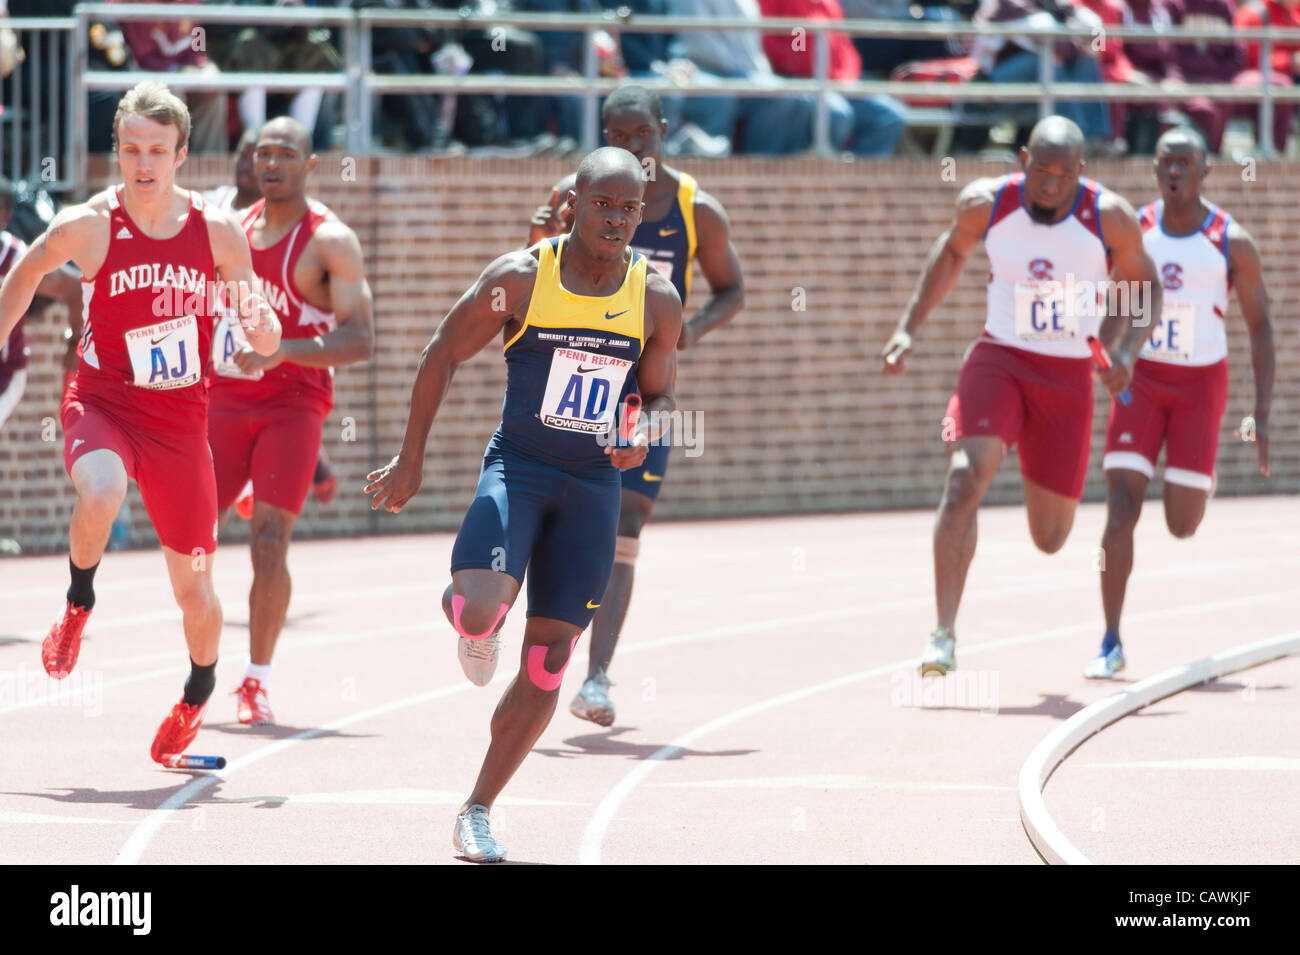 April 27, 2012 - Philadelphia, PA, U.S - INDIANA and UTECH of Jamaica compete in the mens college 4x100 at the 2012 Penn Relays in Philadelphia at Franklin Field. (Credit Image: © Ricky Fitchett/ZUMAPRESS.com) Stock Photo